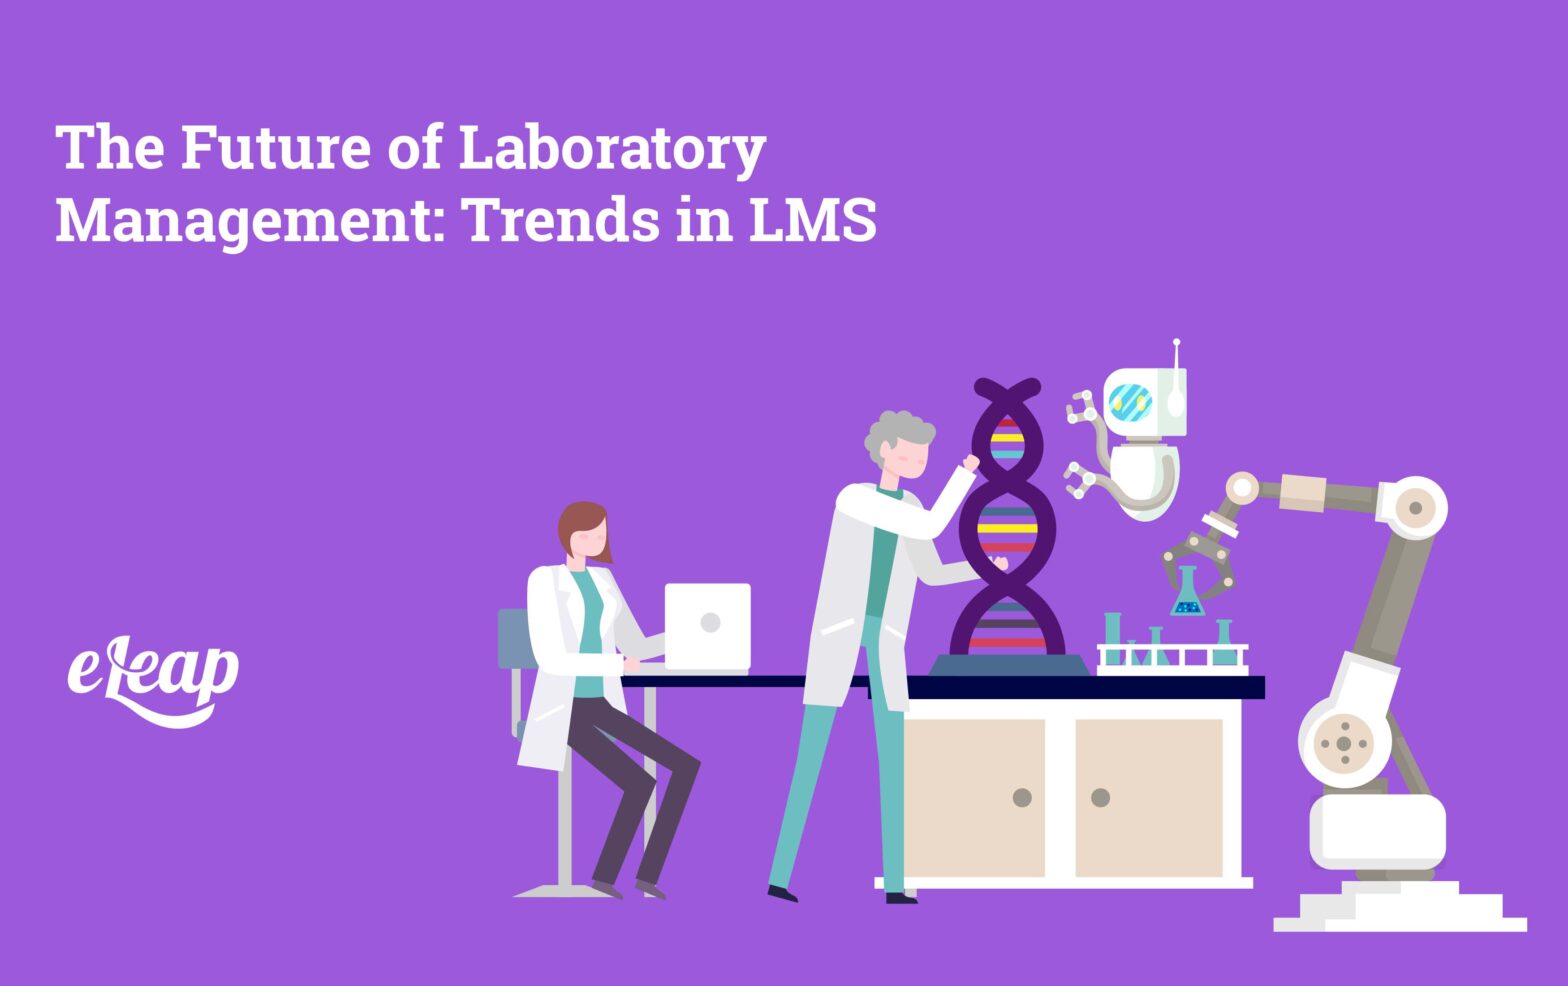 The Future of Laboratory Management: Trends in LMS